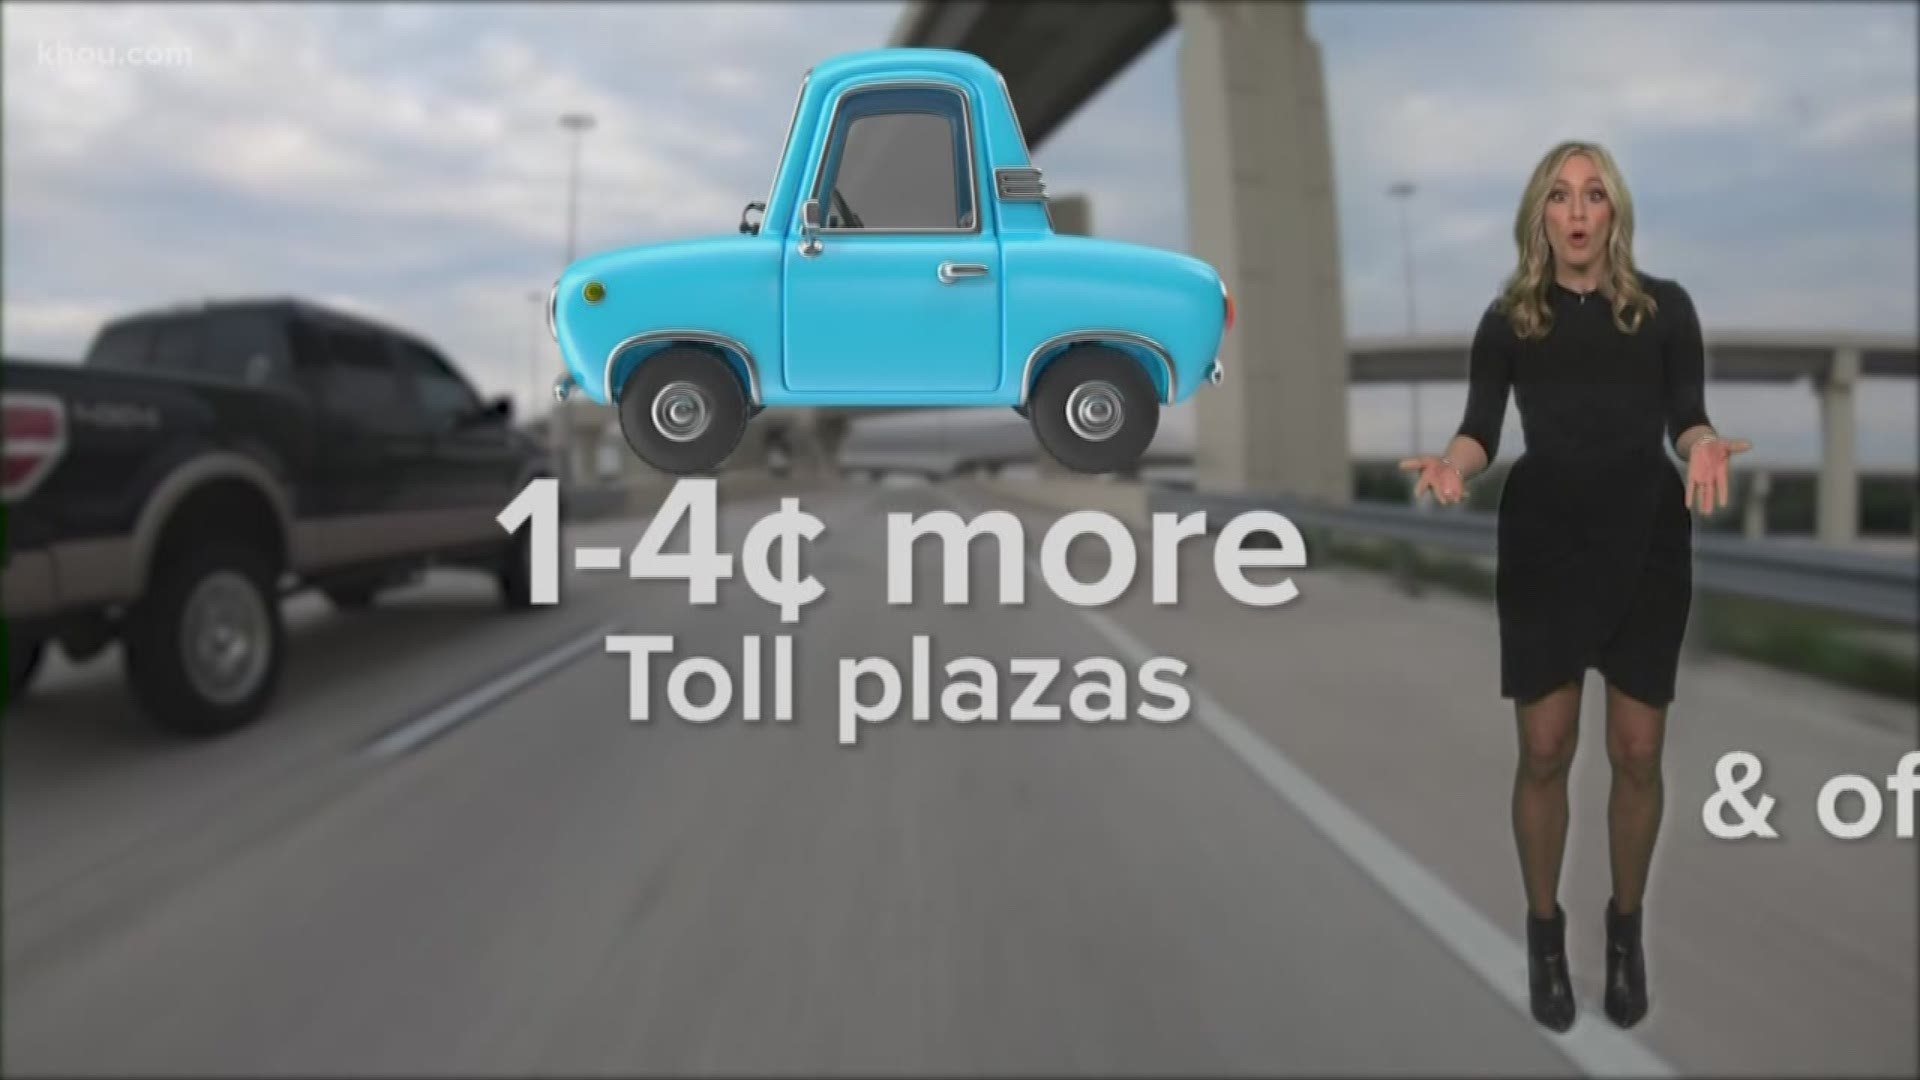 Houston drivers should prepare to pay more money for tolls on the Grand Parkway starting Jan. 1, 2020.